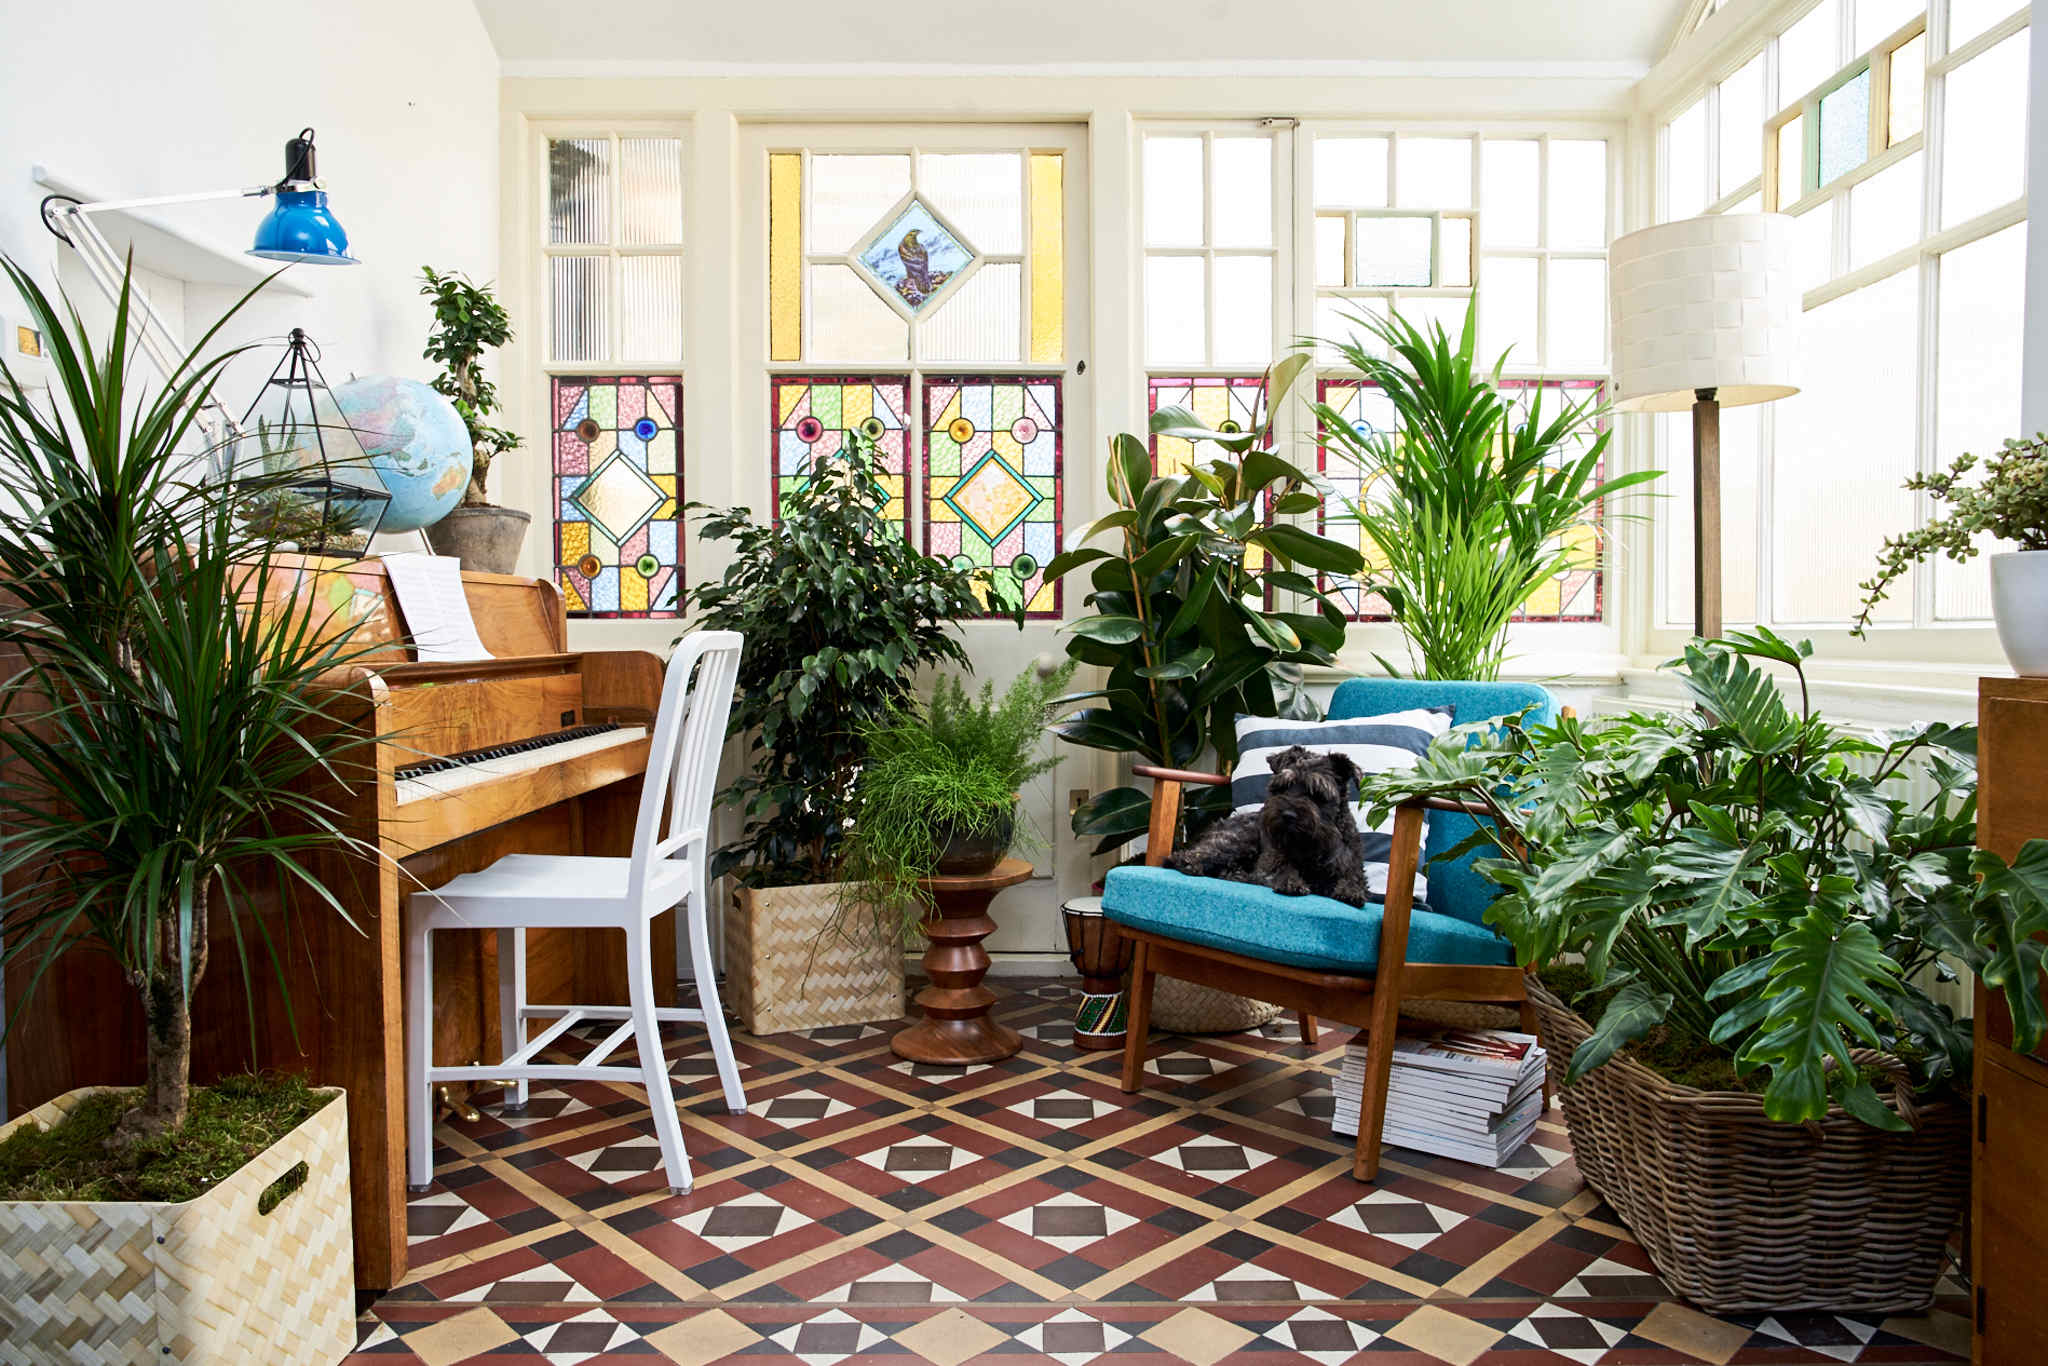 9 easy ways to fill your house with plants | pebble magazine